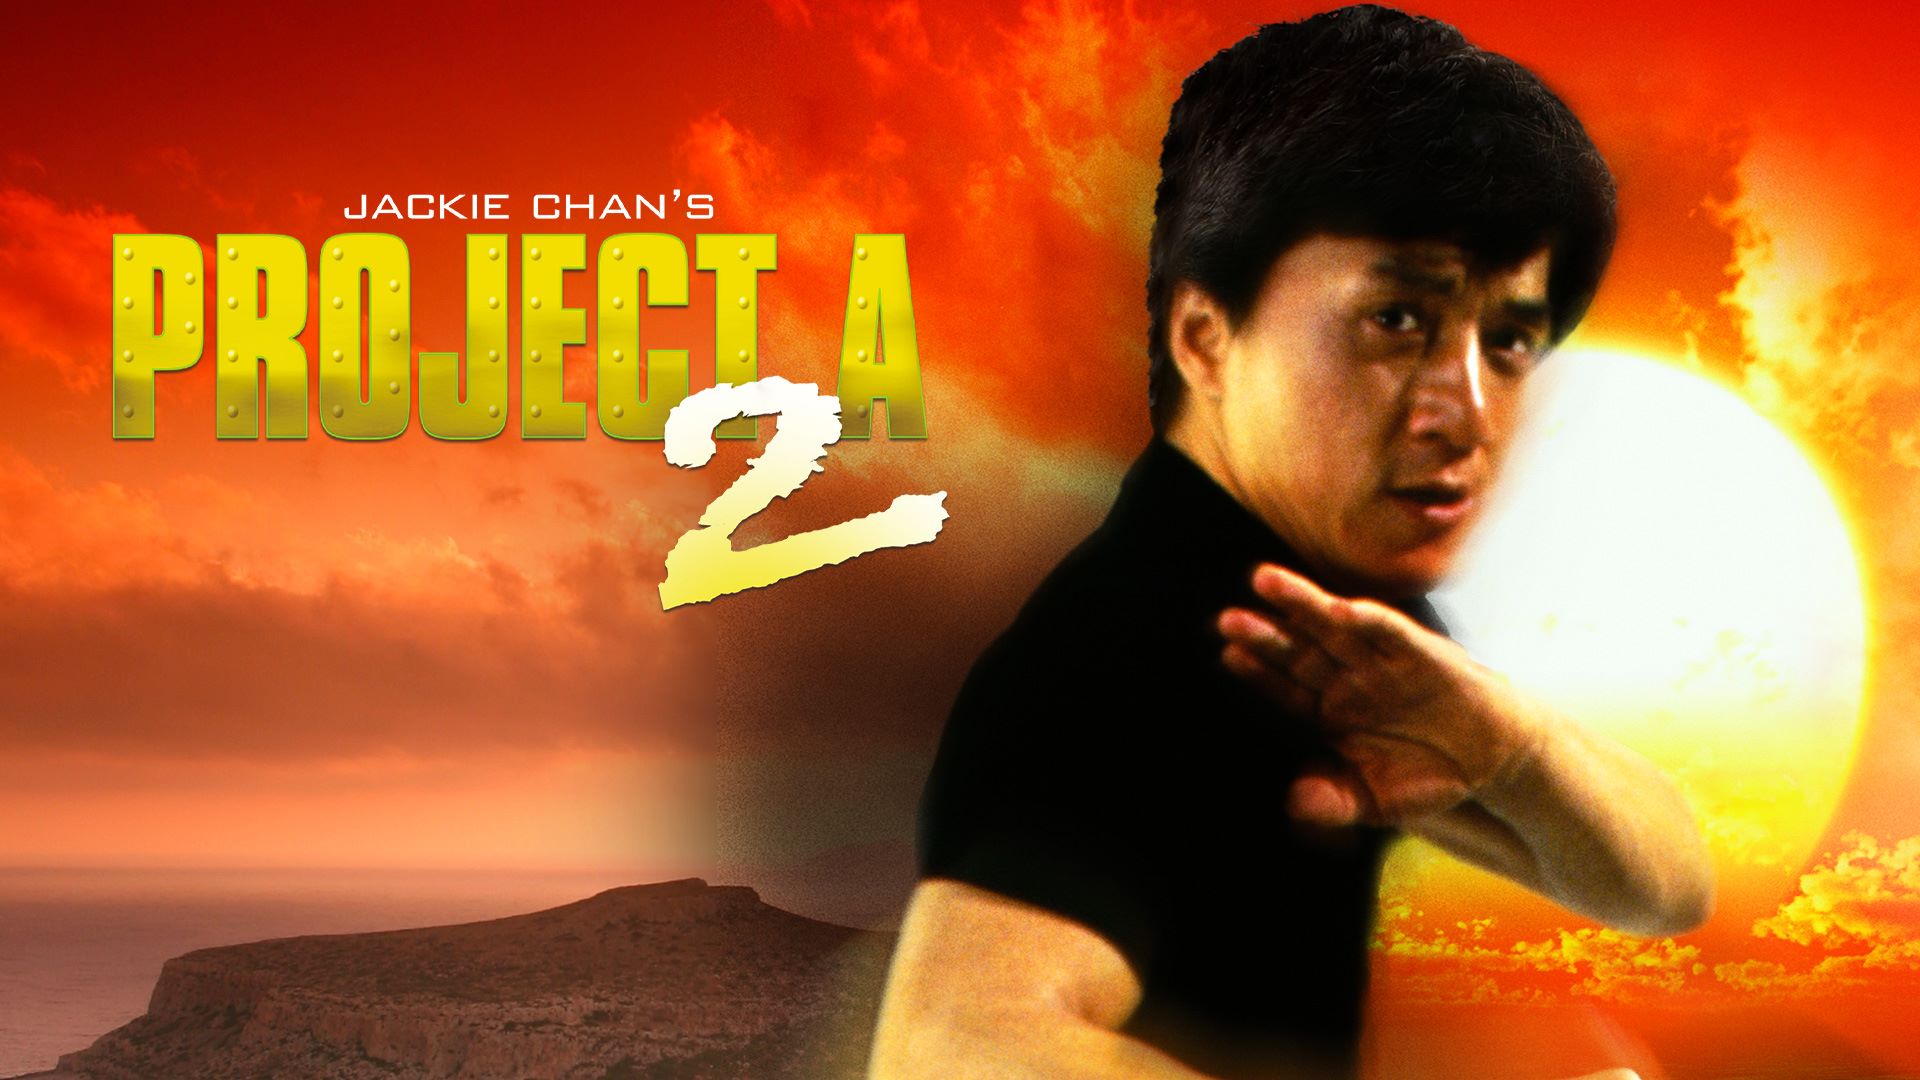 32-facts-about-the-movie-jackie-chans-project-a2